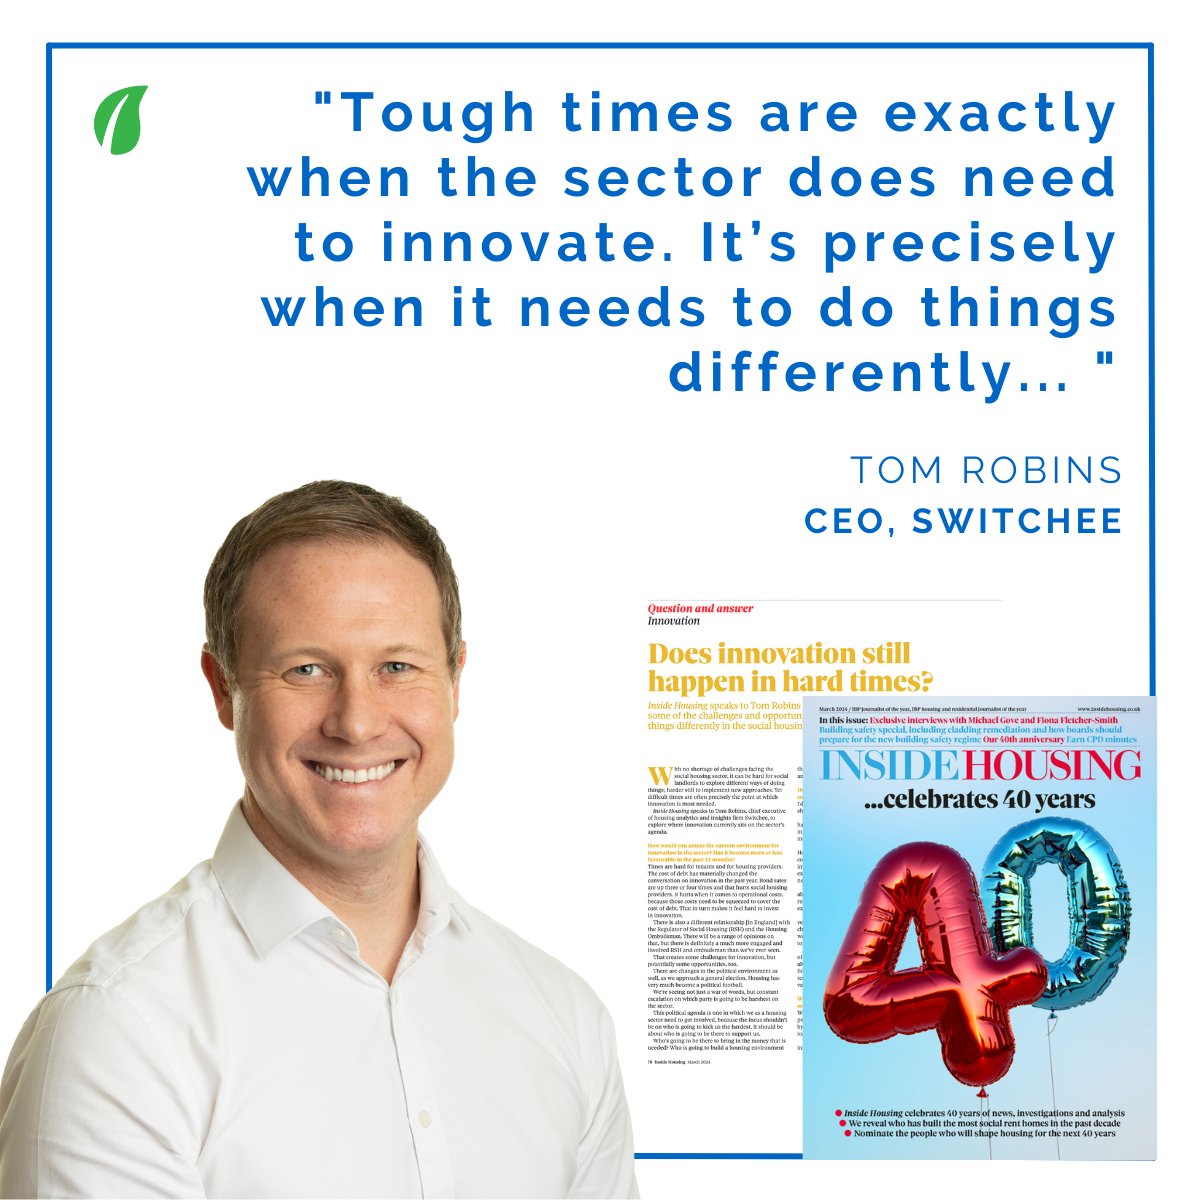 ❓ Does #innovation still happen in hard times? In the 40th anniversary edition of @insidehousing, @TomR_Switchee explains some of the challenges and opportunities presented by doing things differently in #UKHousing. Read more at hubs.li/Q02qV0Nx0